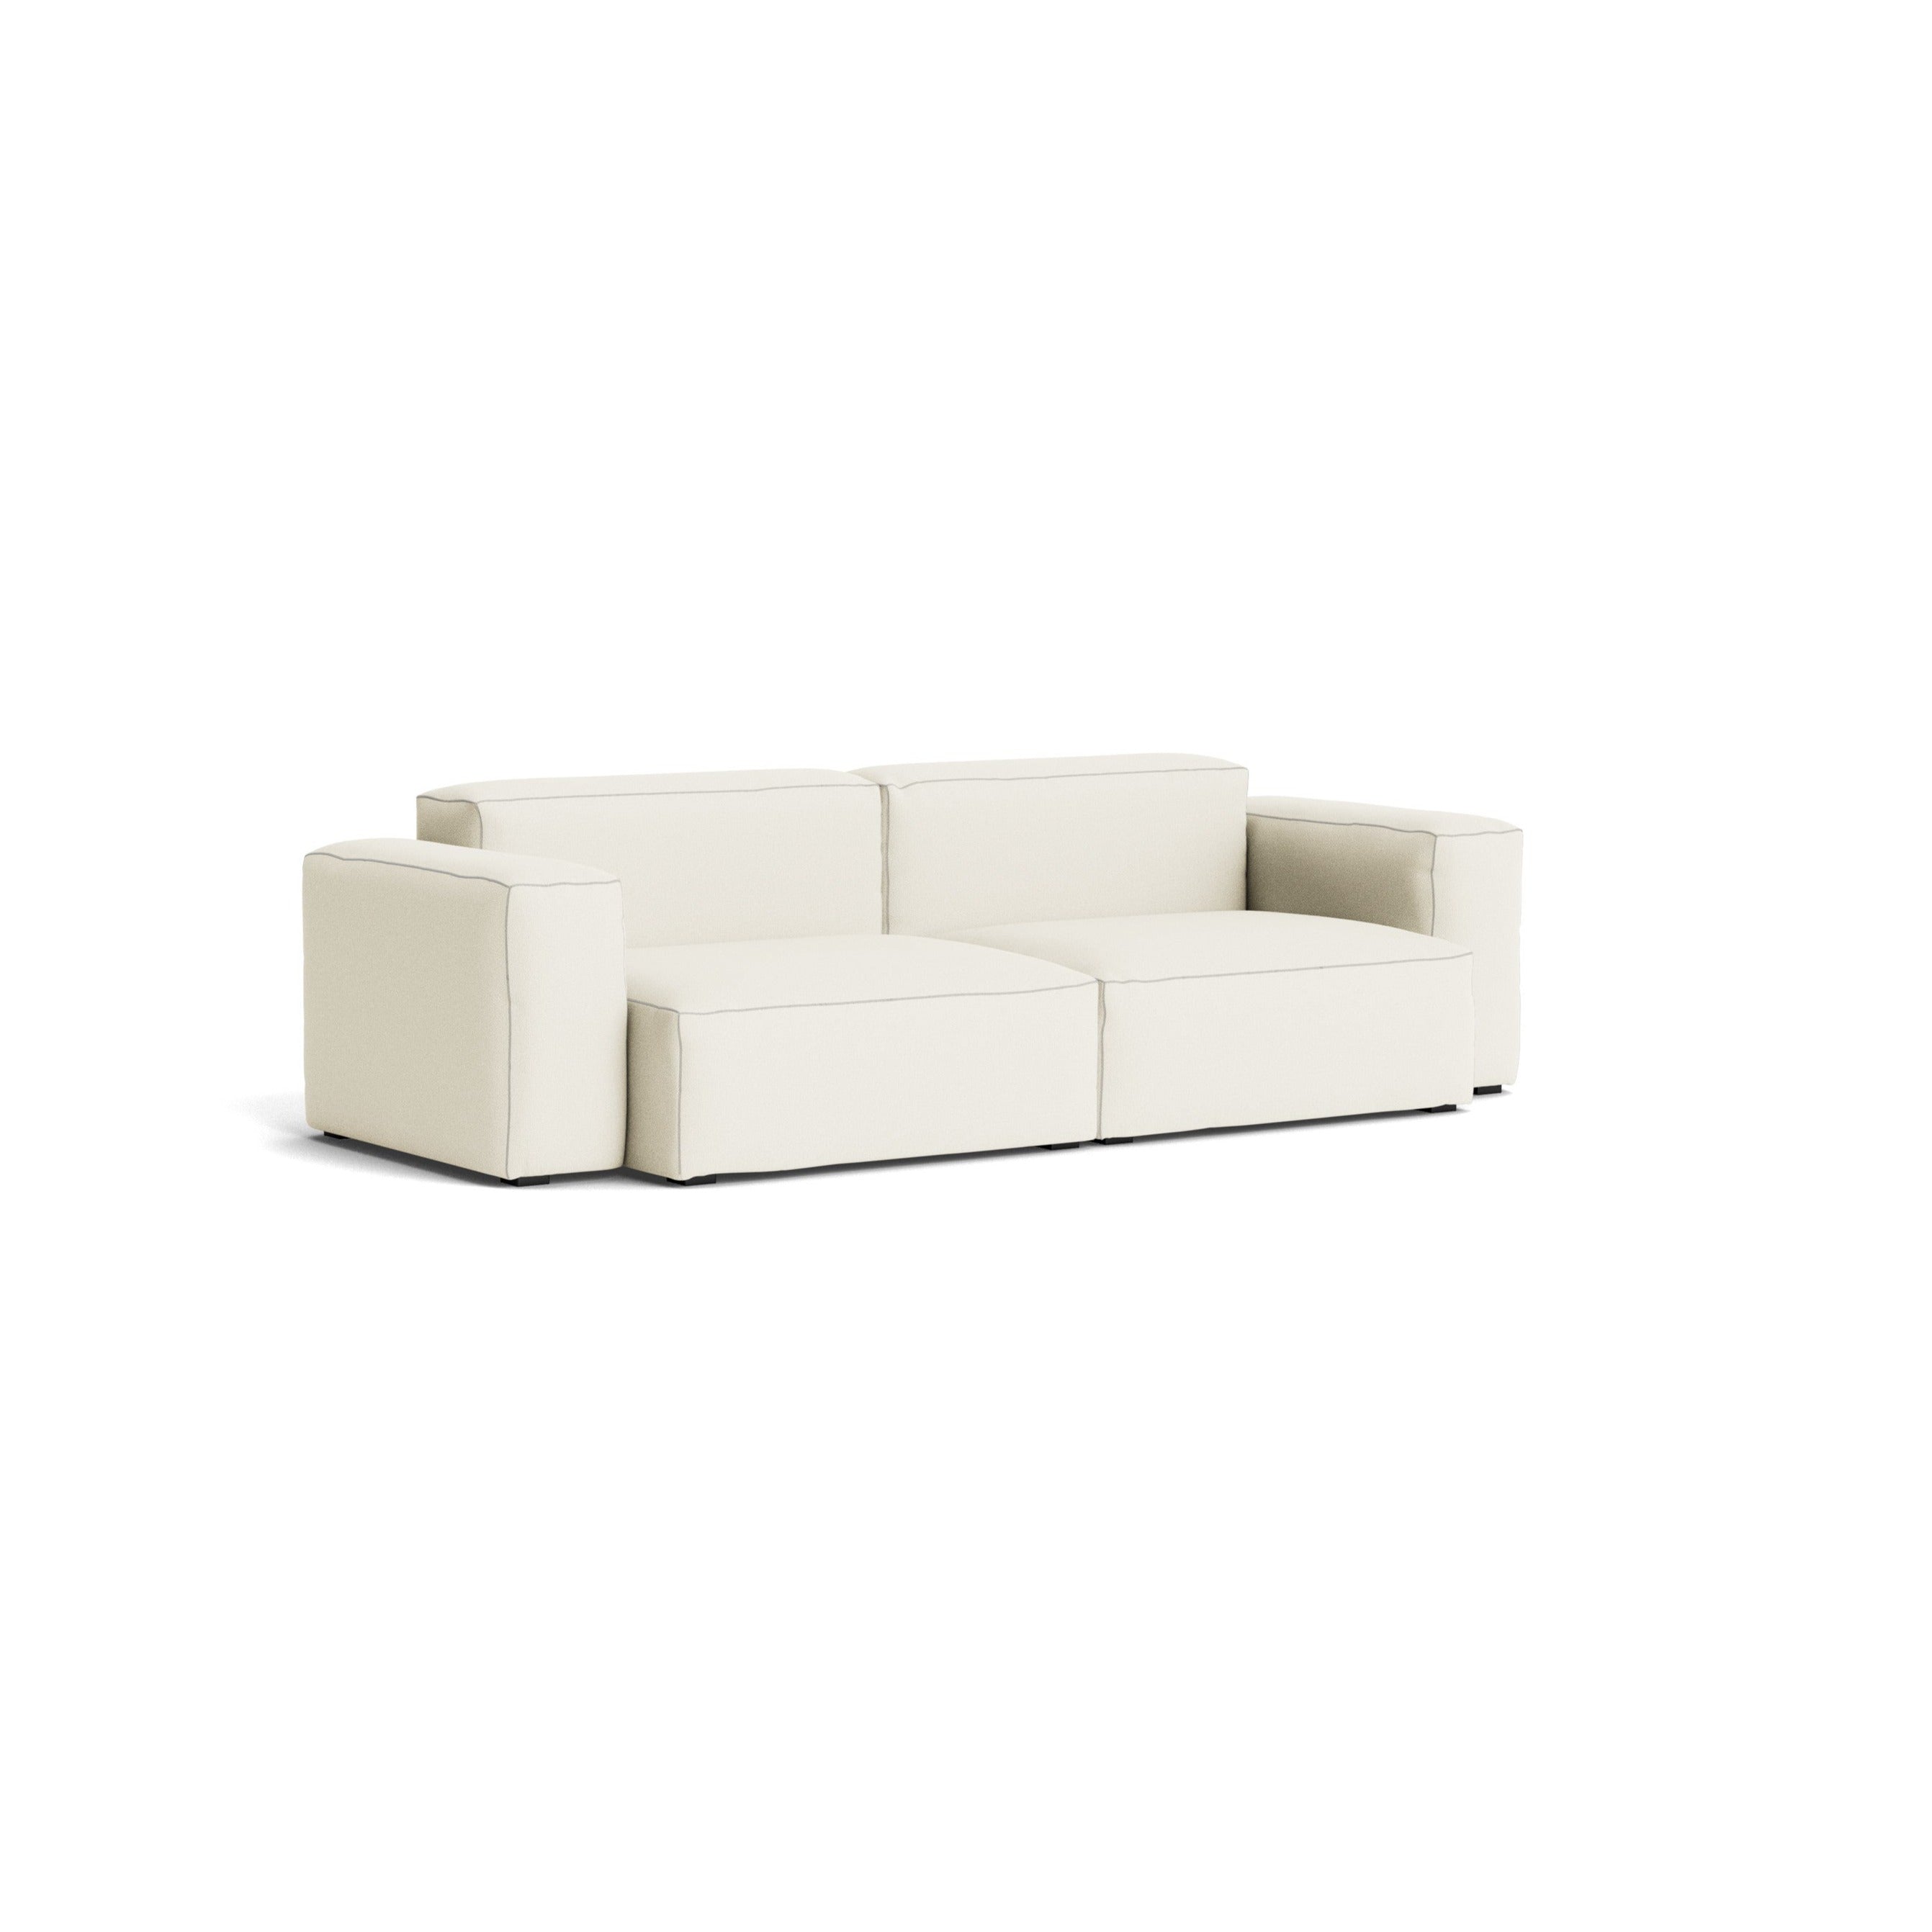 HAY Mags Soft Low Armrest Sofa 2 Seater - Combination 1